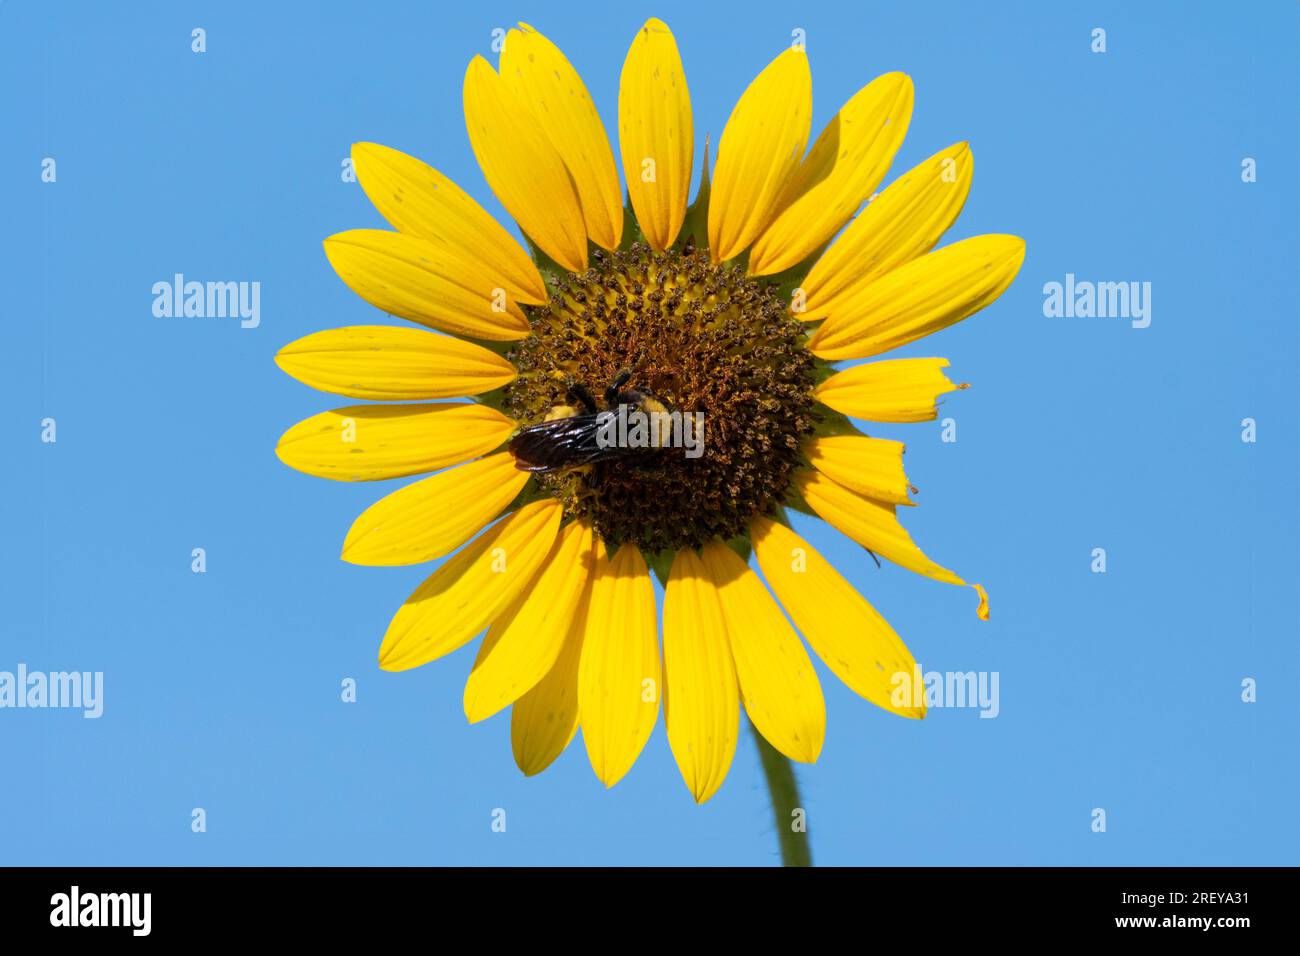 A large black and yellow Bumblebee pollenating a Sunflower bloom as it gathers pollen from the flower on a sunny, Summer morning. Stock Photo